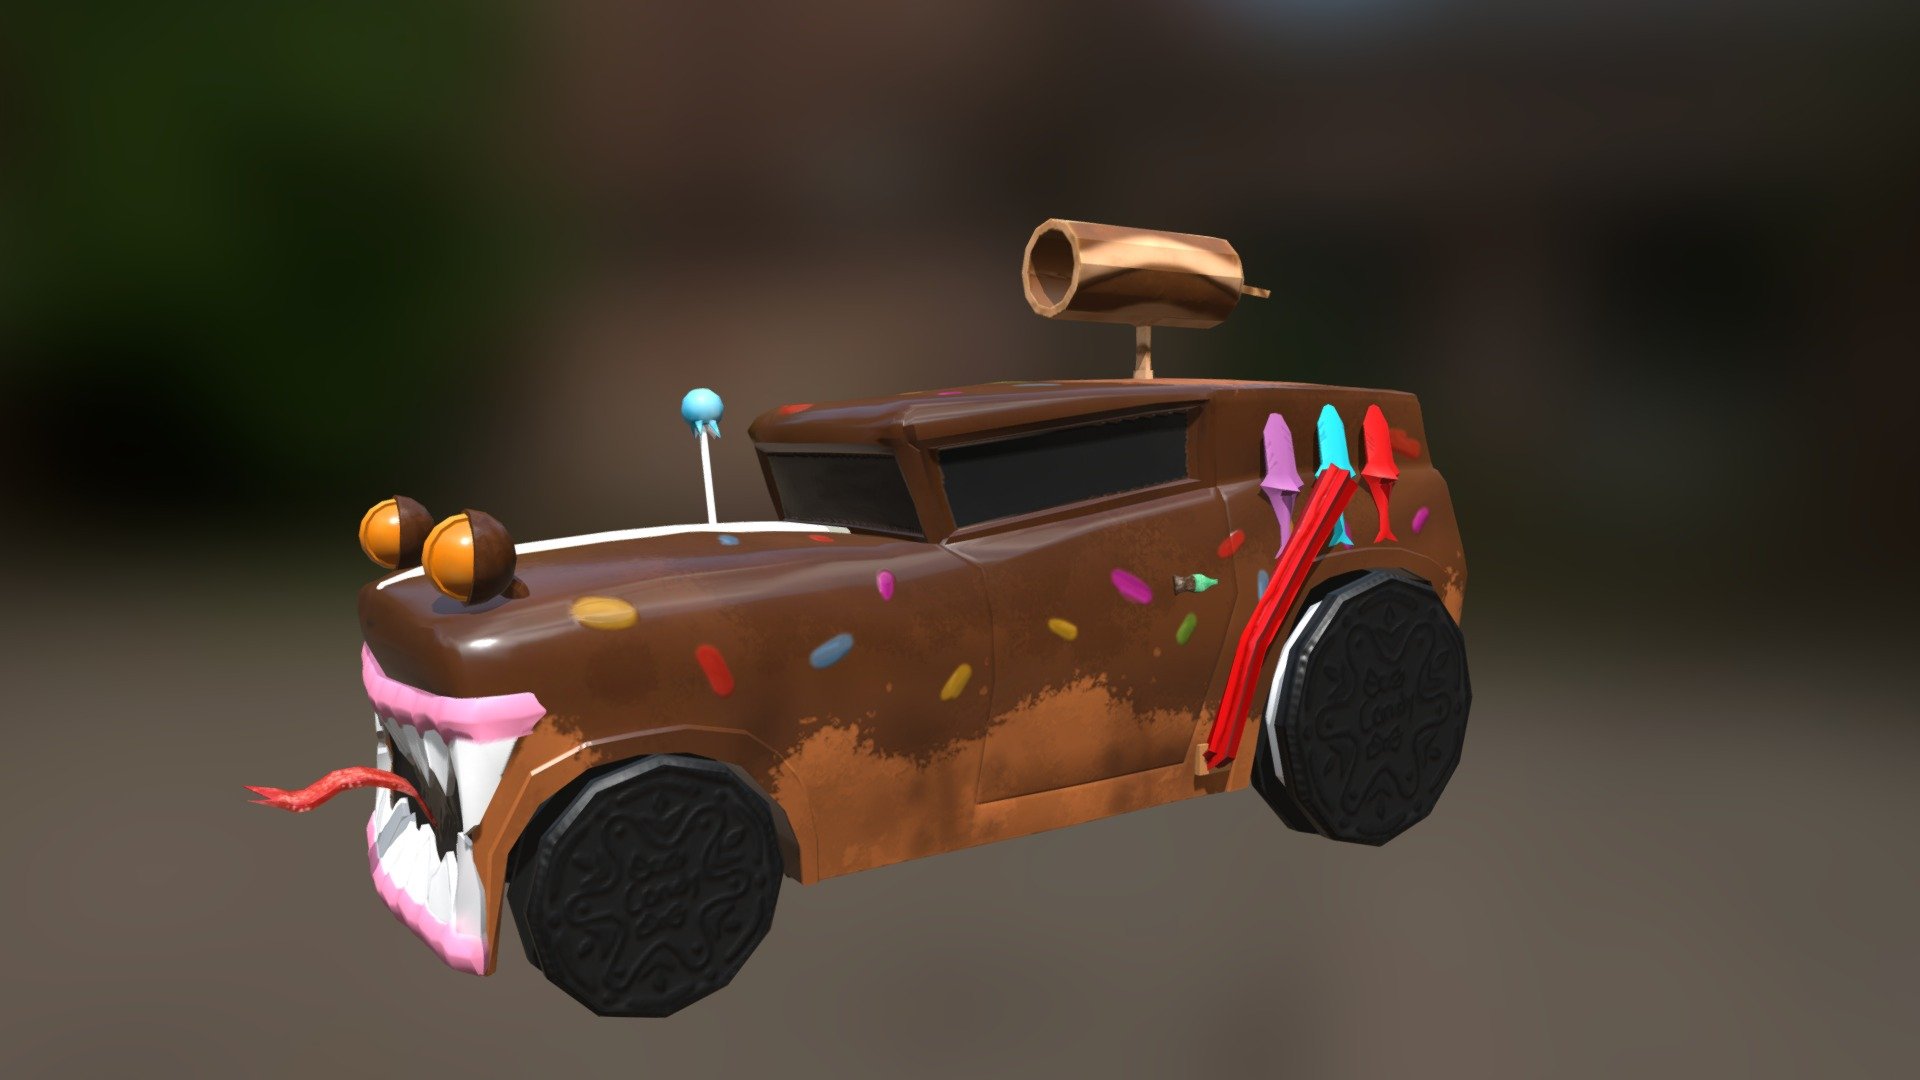 This is my model for the challenge low poly car of sketchfab, my idea, it's a car made with candies and sweets with a skin punk or alternative.
It's the time that the bad girls and bad boys the candy world have a car and enlive them world 3d model